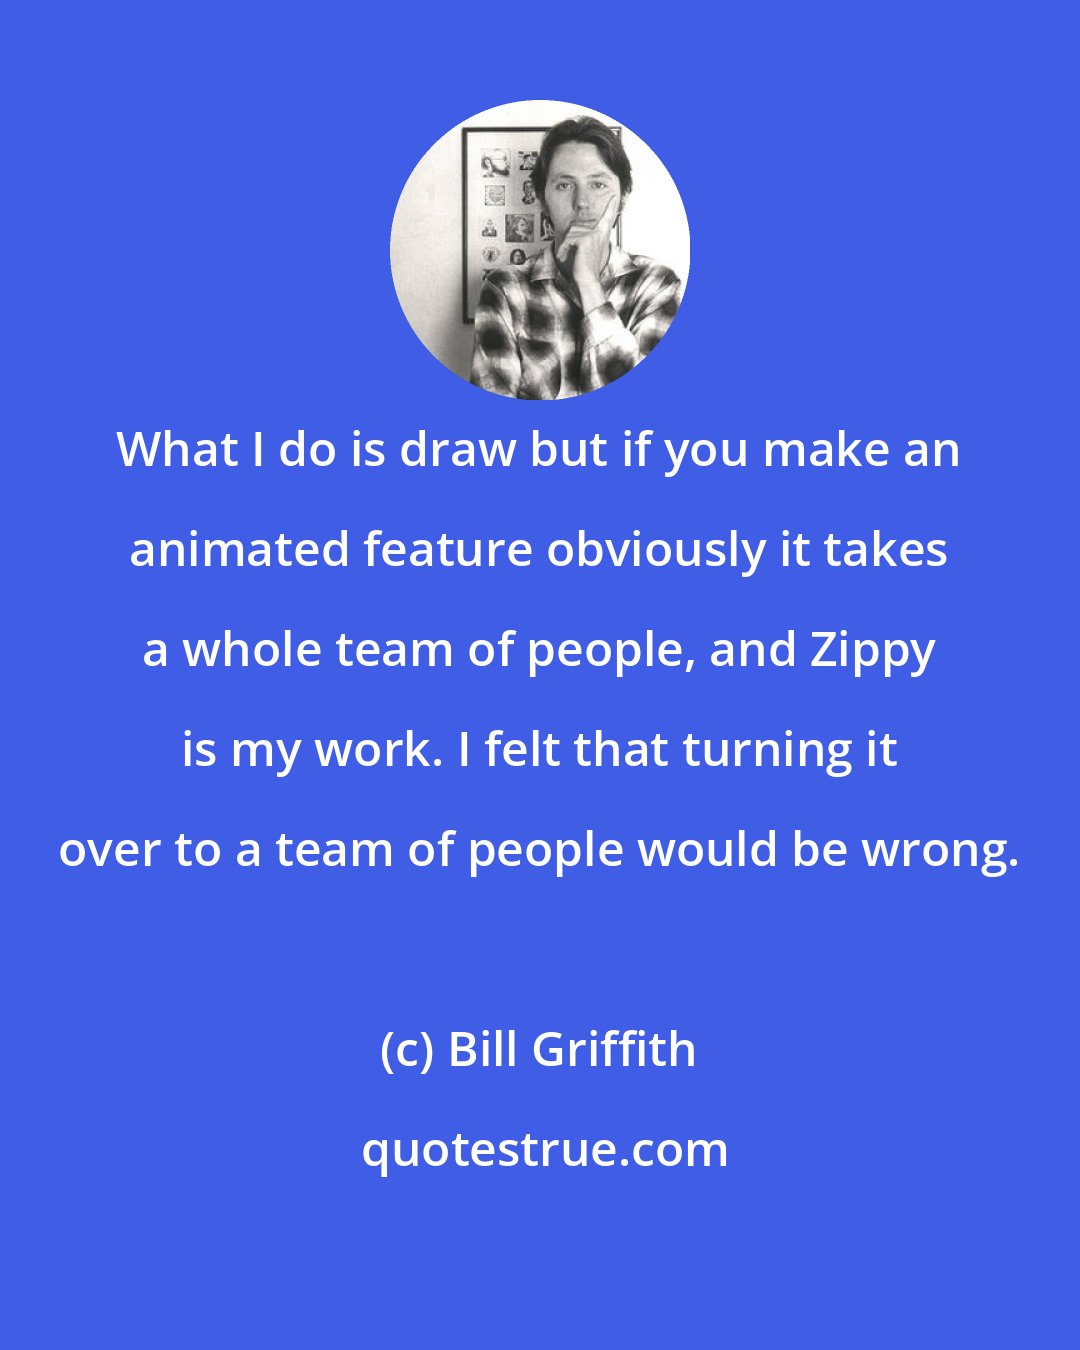 Bill Griffith: What I do is draw but if you make an animated feature obviously it takes a whole team of people, and Zippy is my work. I felt that turning it over to a team of people would be wrong.